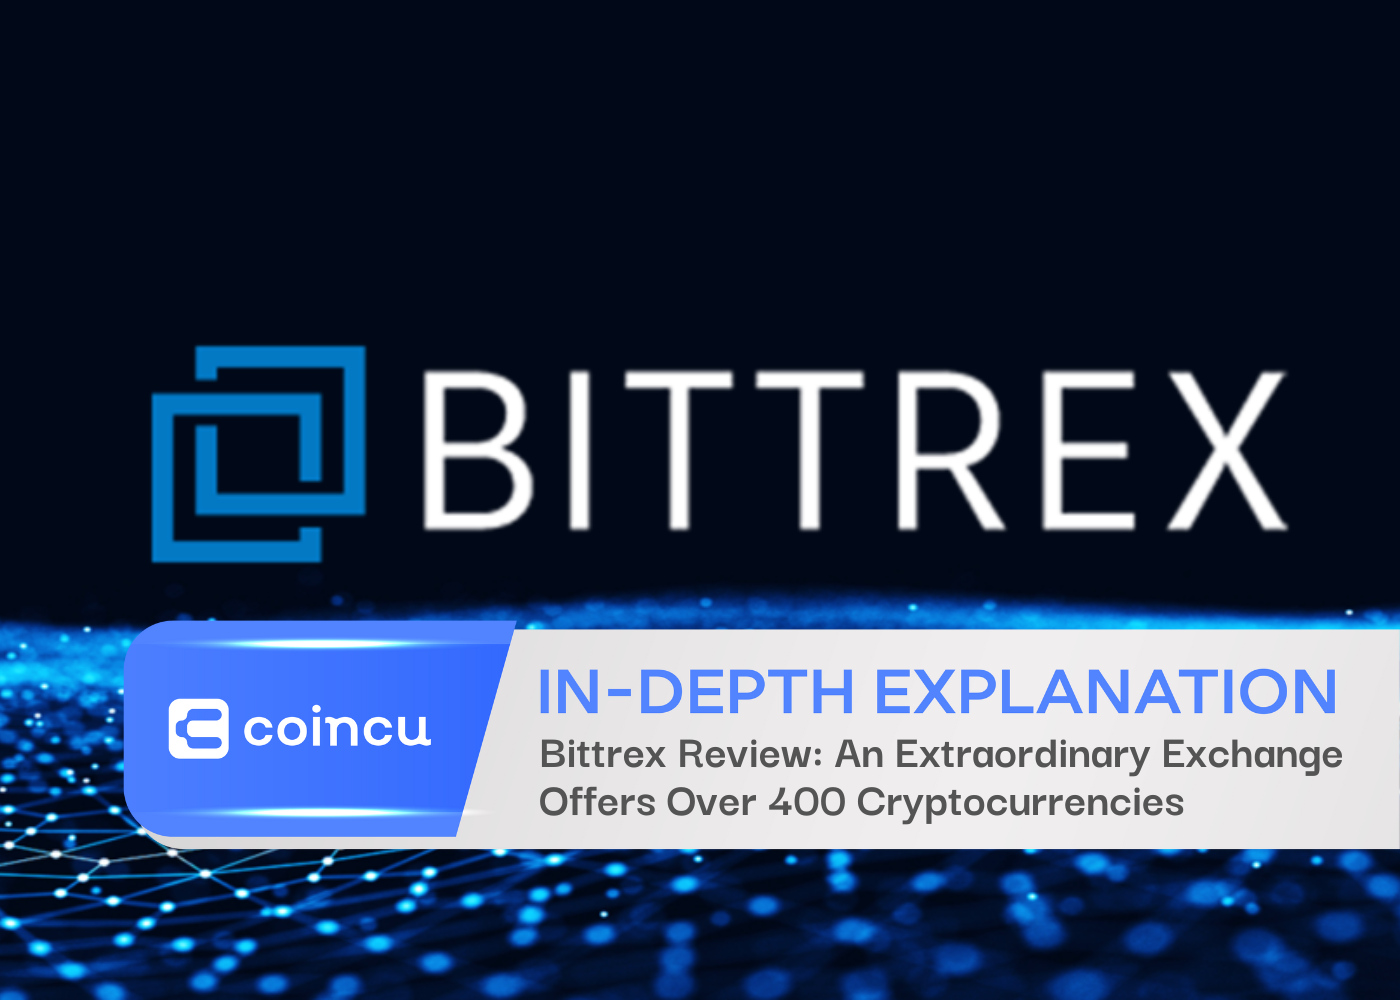 Bittrex Review: An Extraordinary Exchange Offers Over 400 Cryptocurrencies